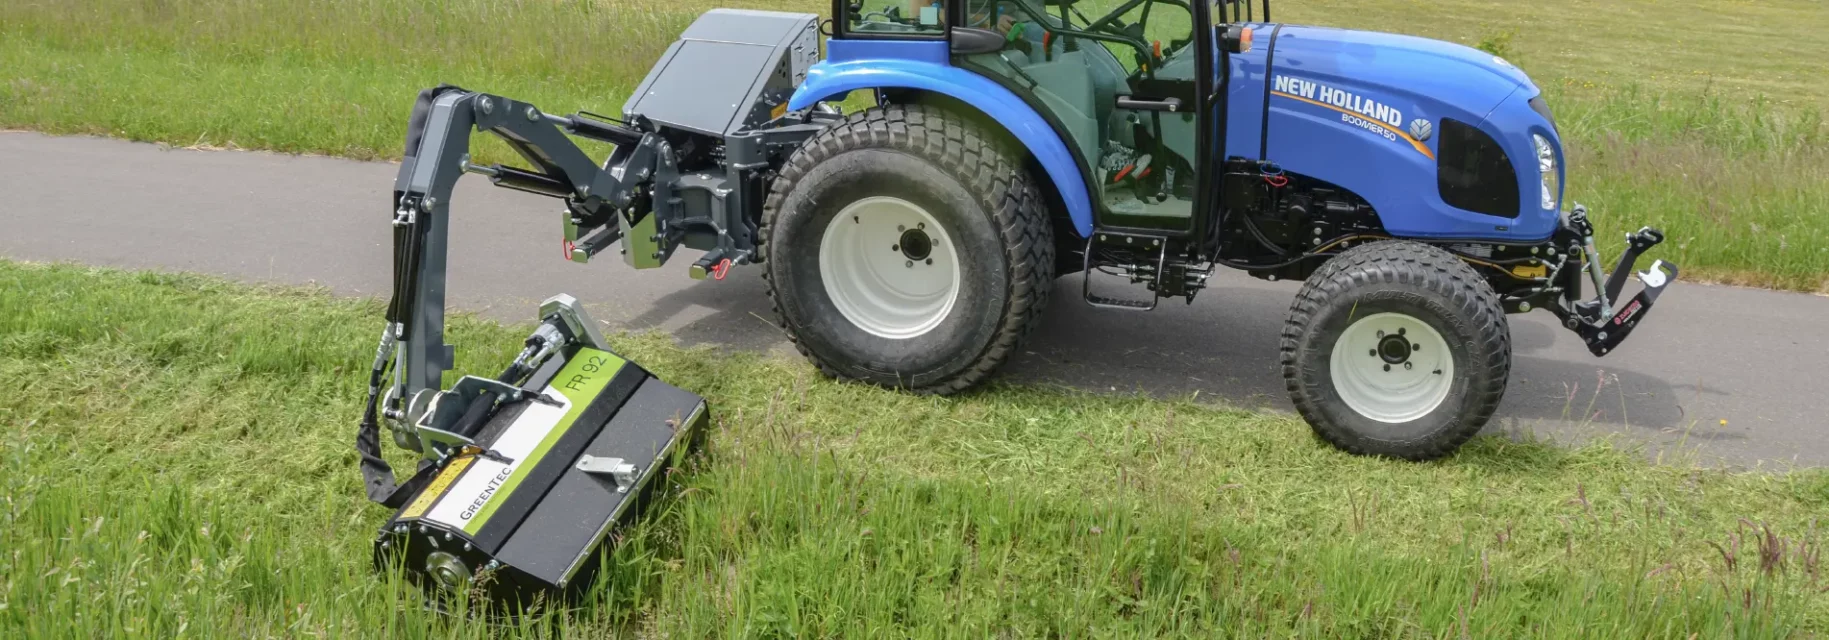 Professional ditch mowers for compact tractors